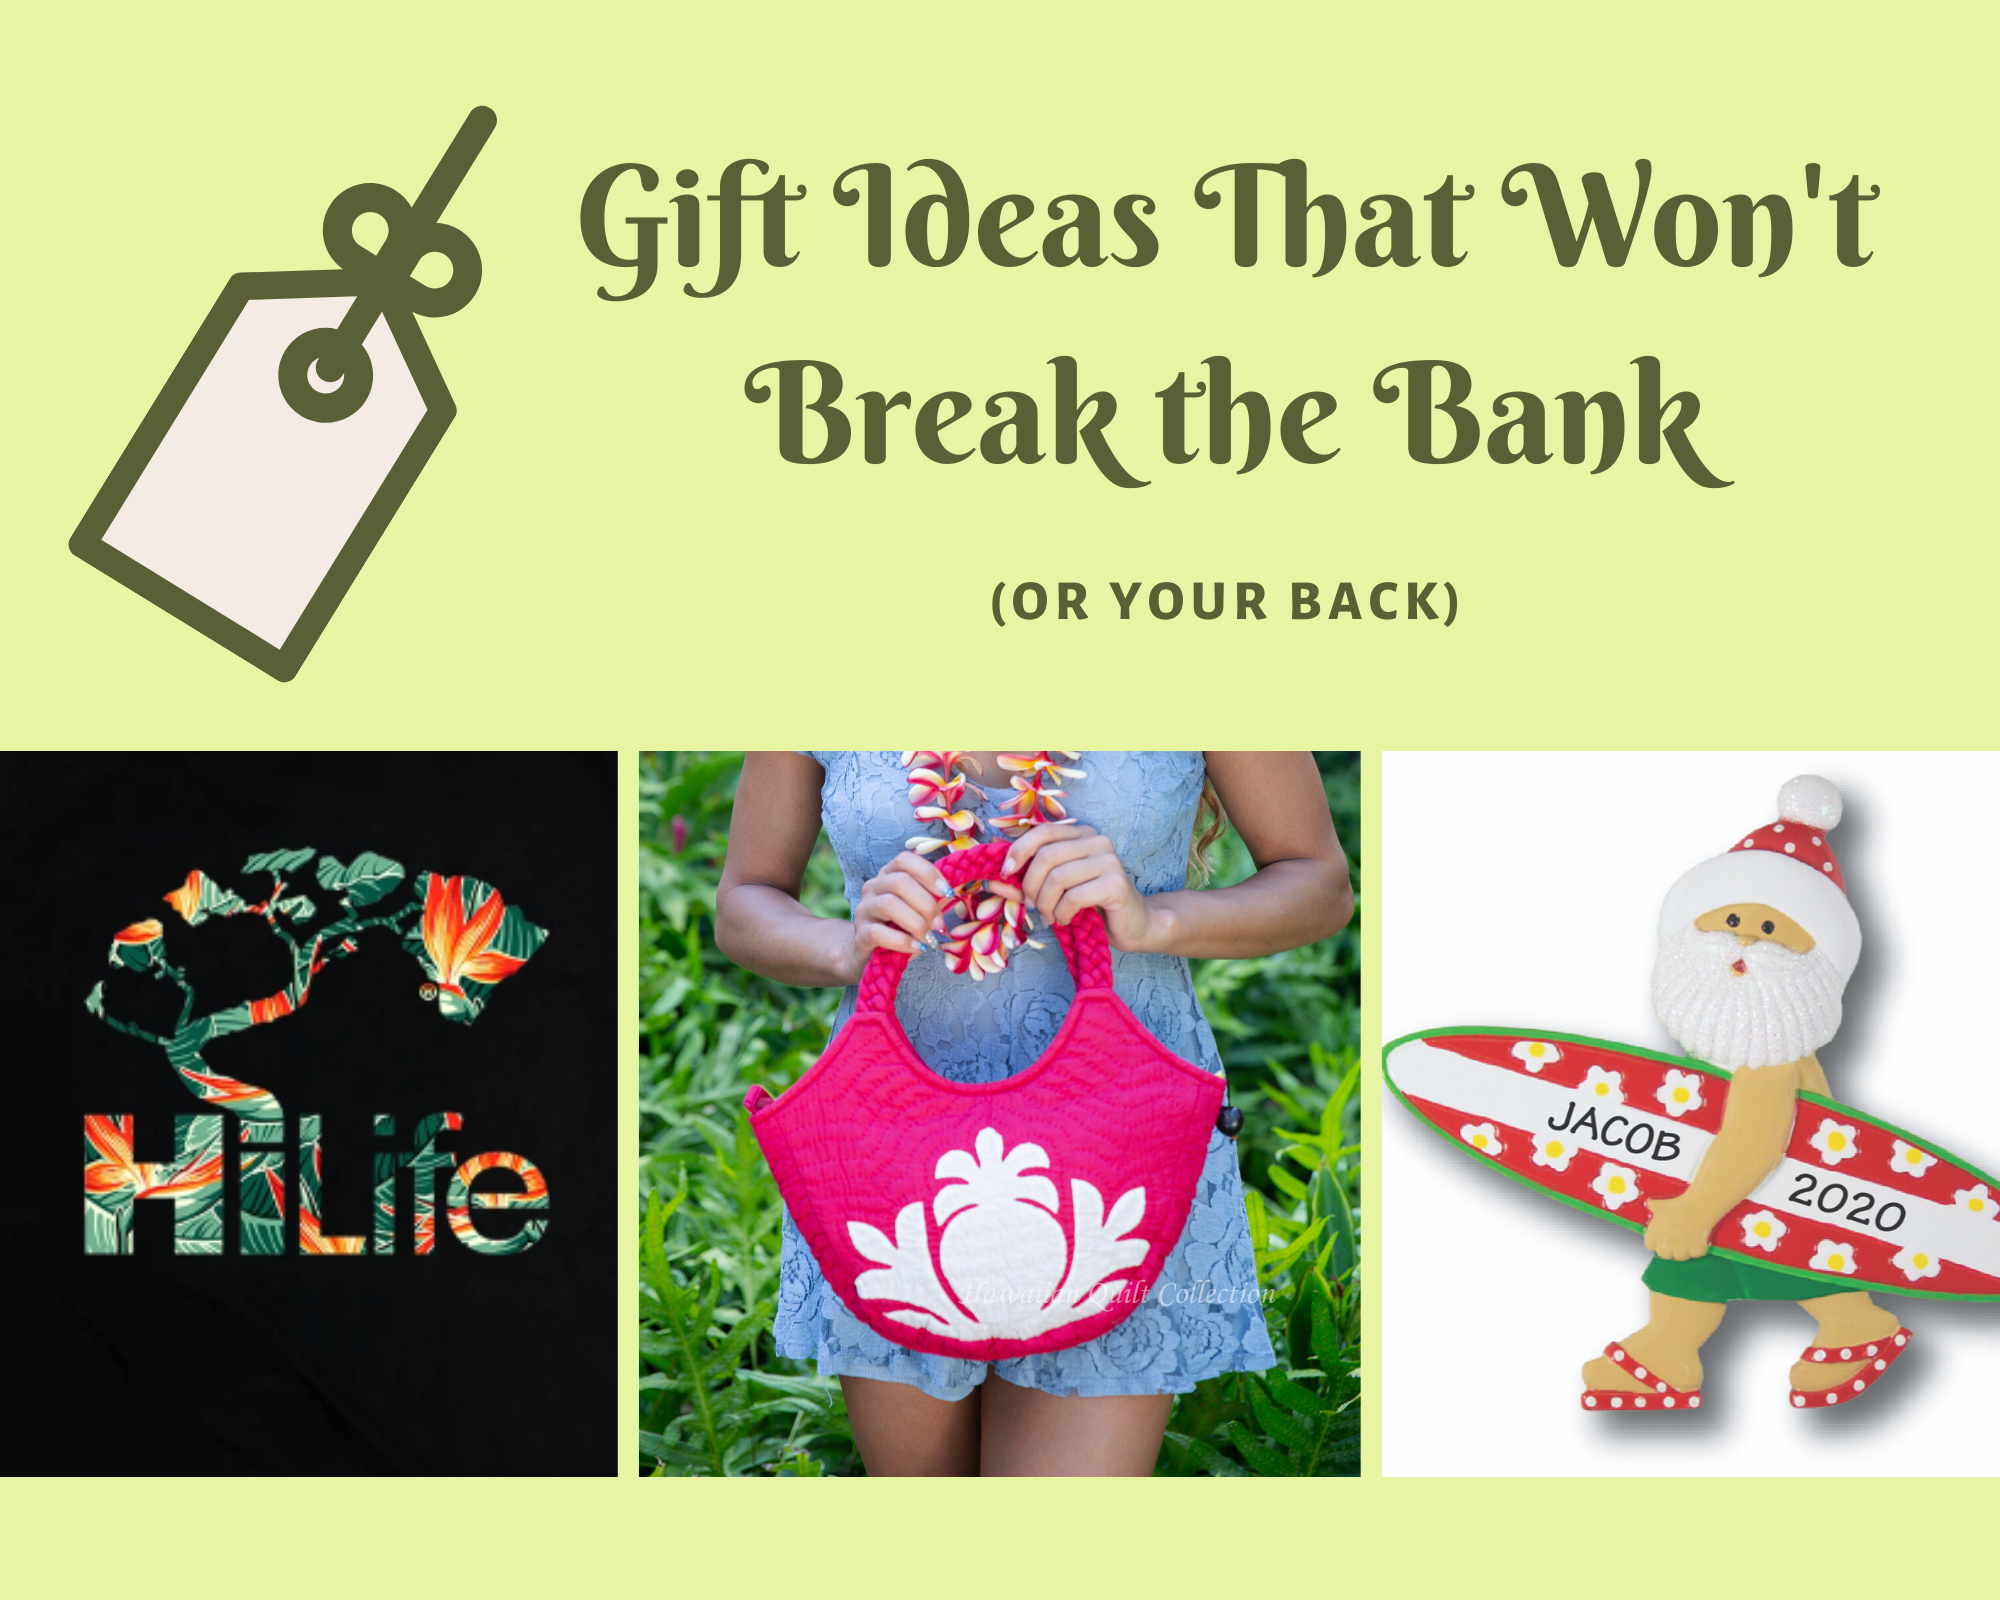 Gift Ideas That Won't Break the Bank (or Your Back)